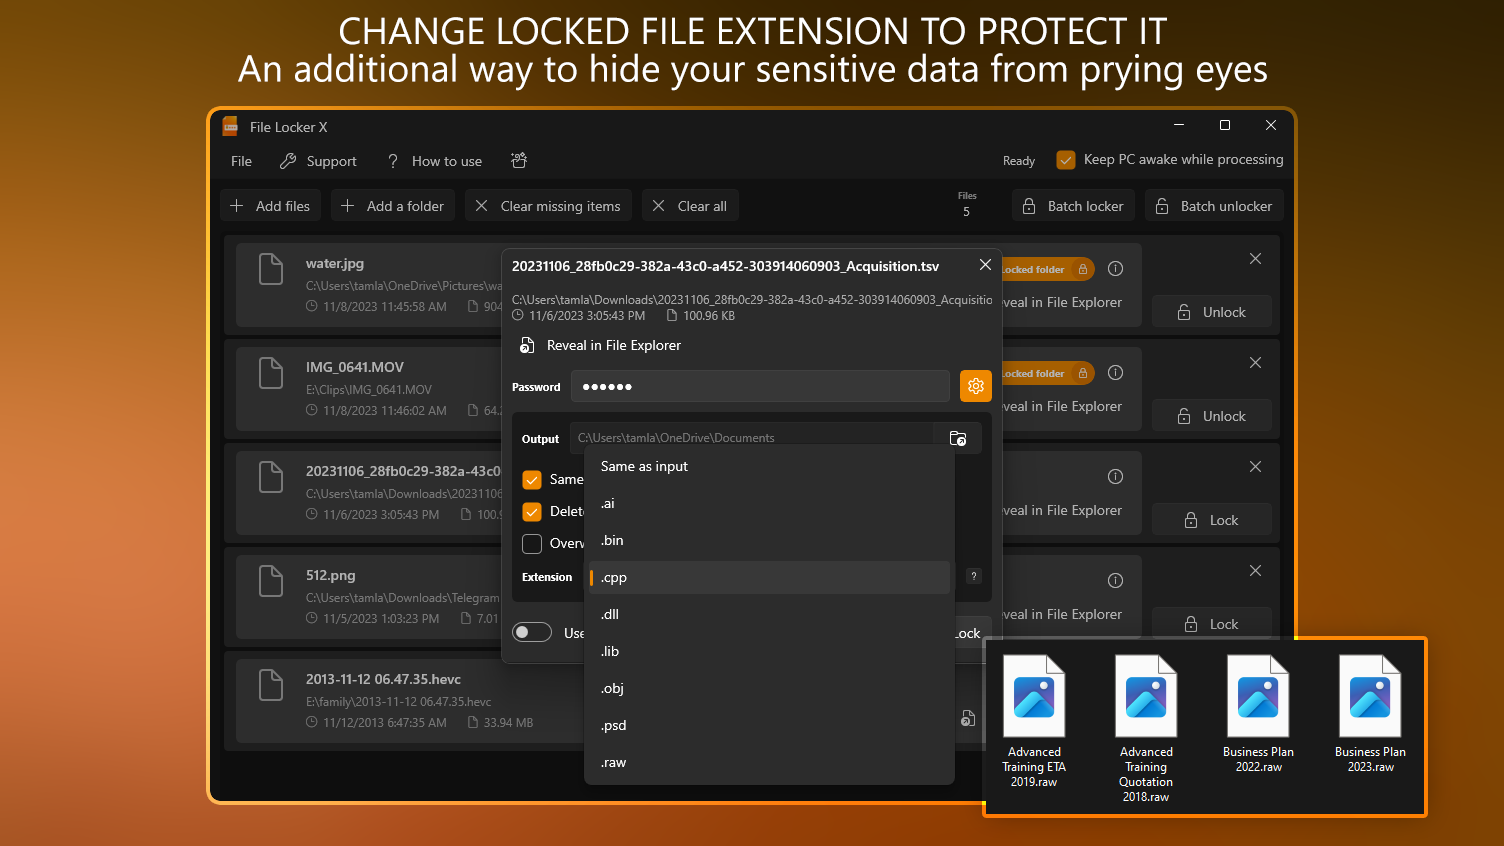 Change Locked File Extension to Protect It - An additional way to hide your sensitive data from prying eyes